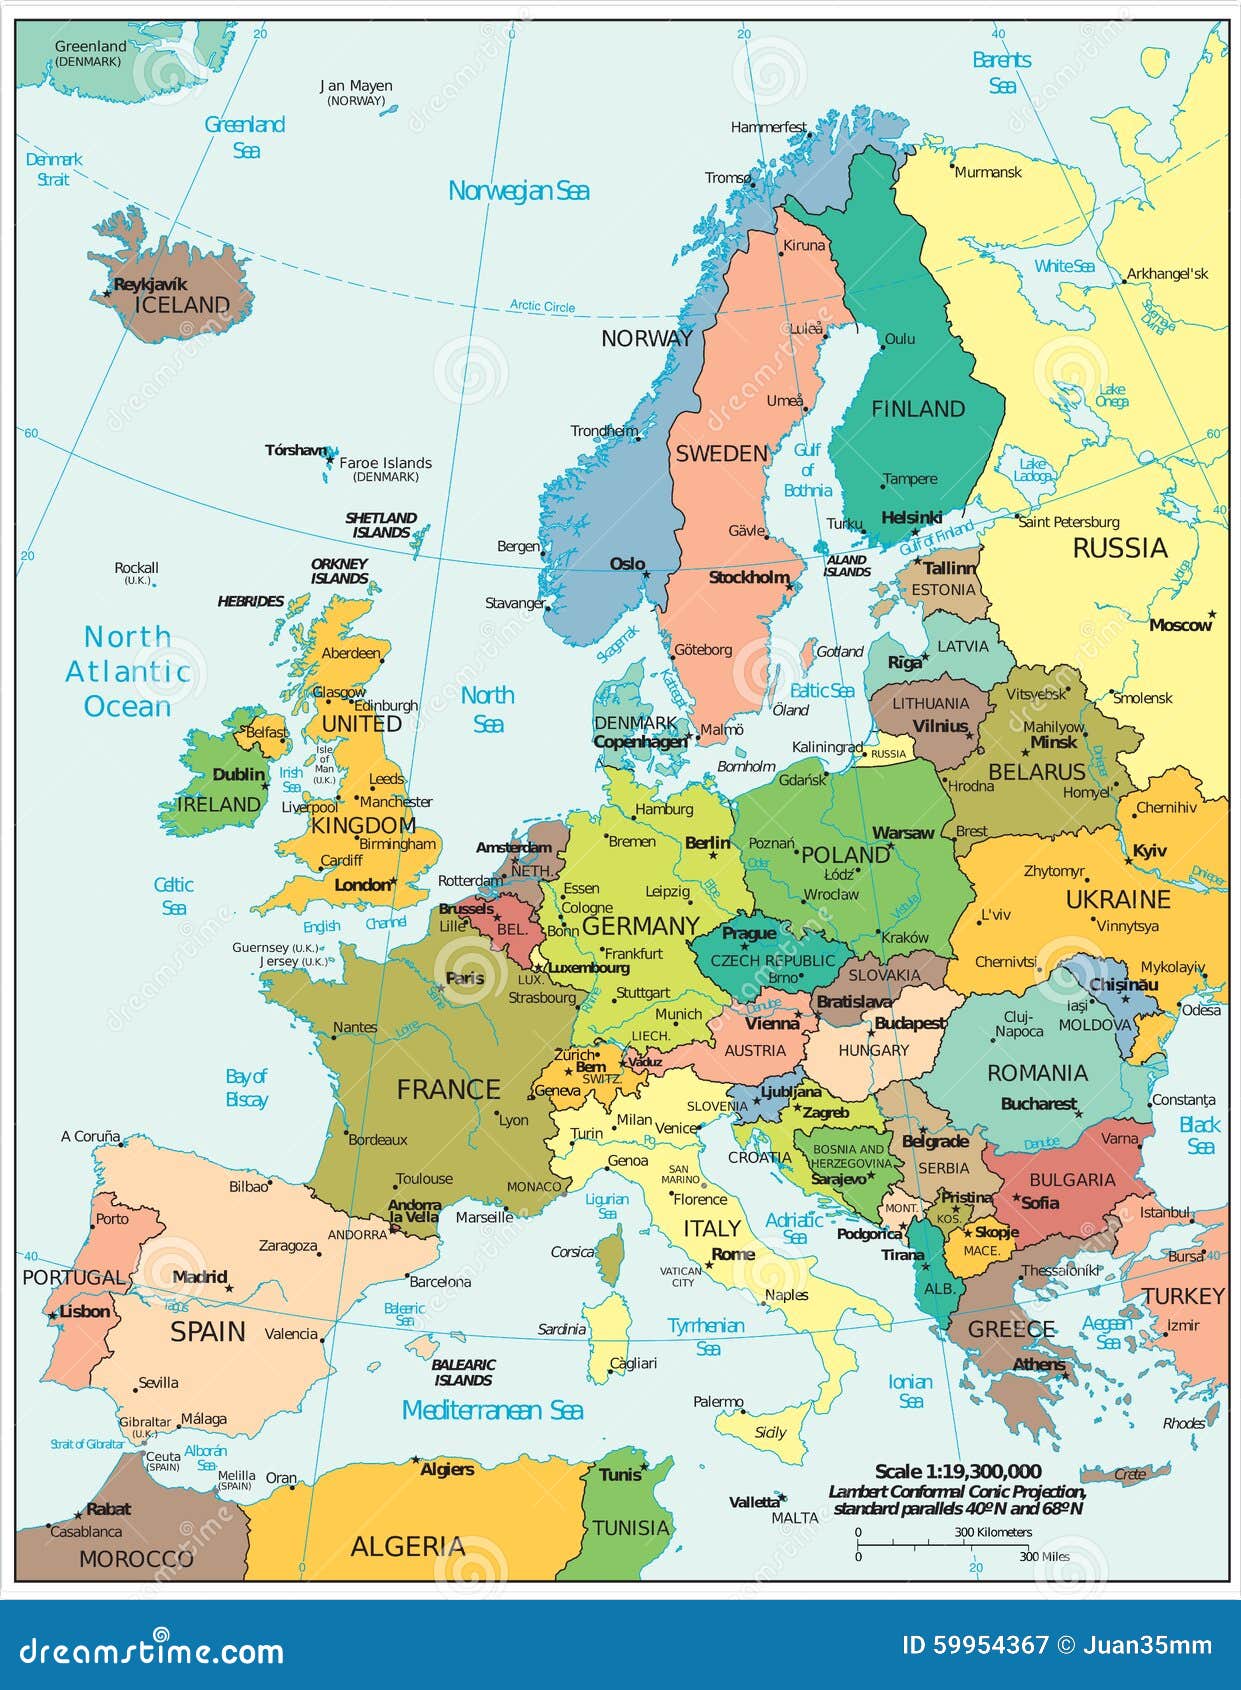 Geographical Map Of Europe And Asia - 88 World Maps